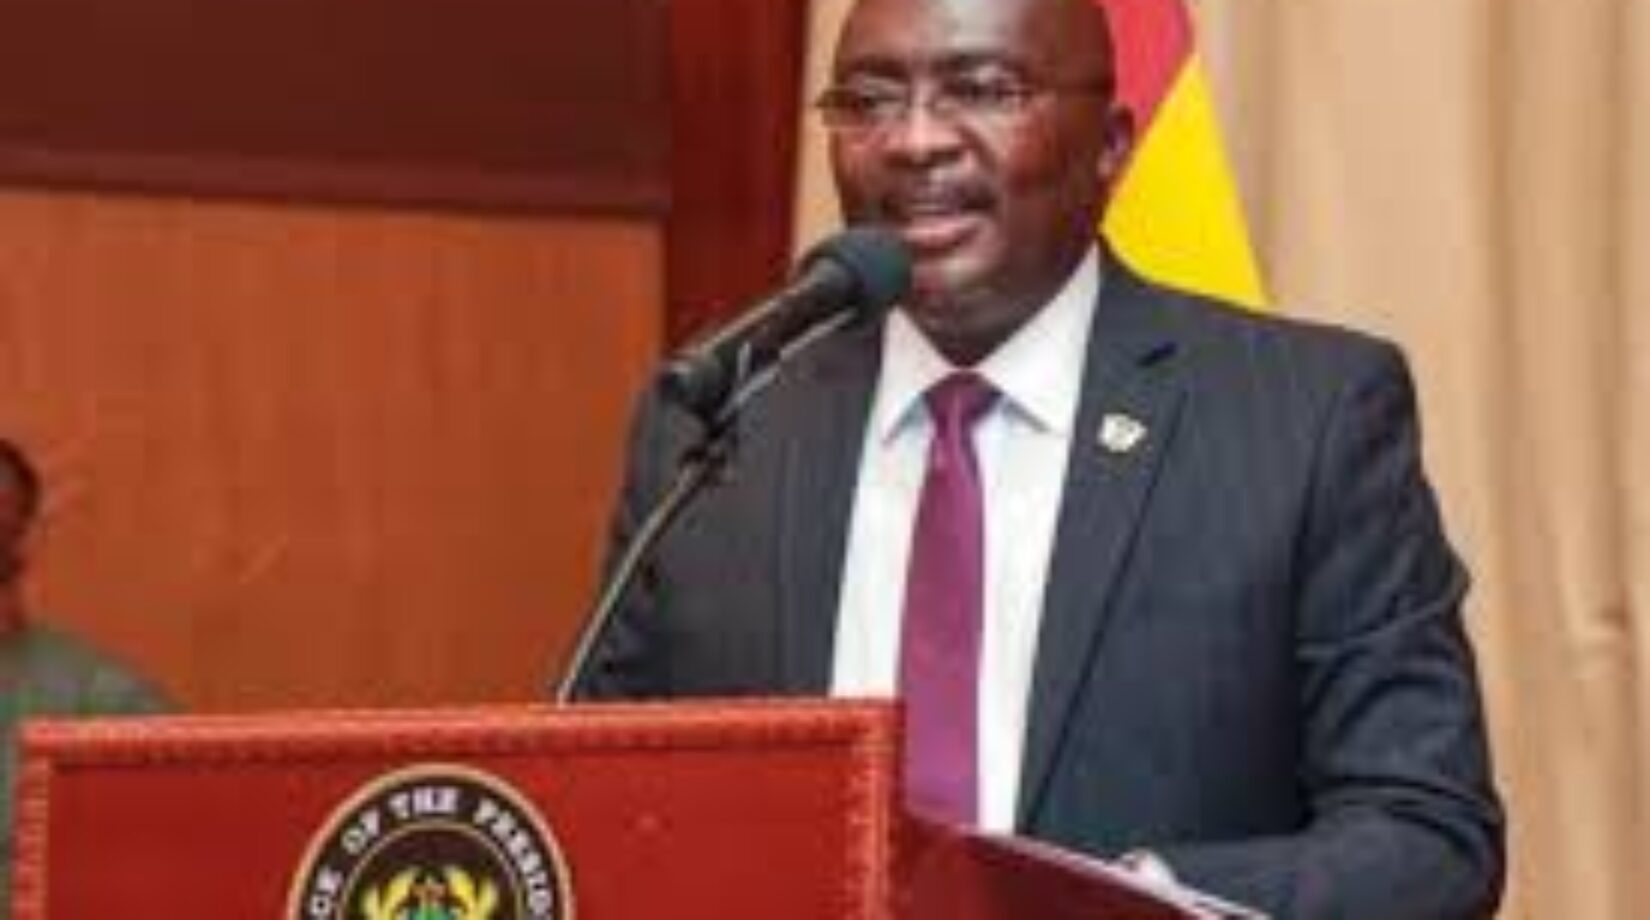 Dr.Bawumia urges collaboration for peace in Bawku